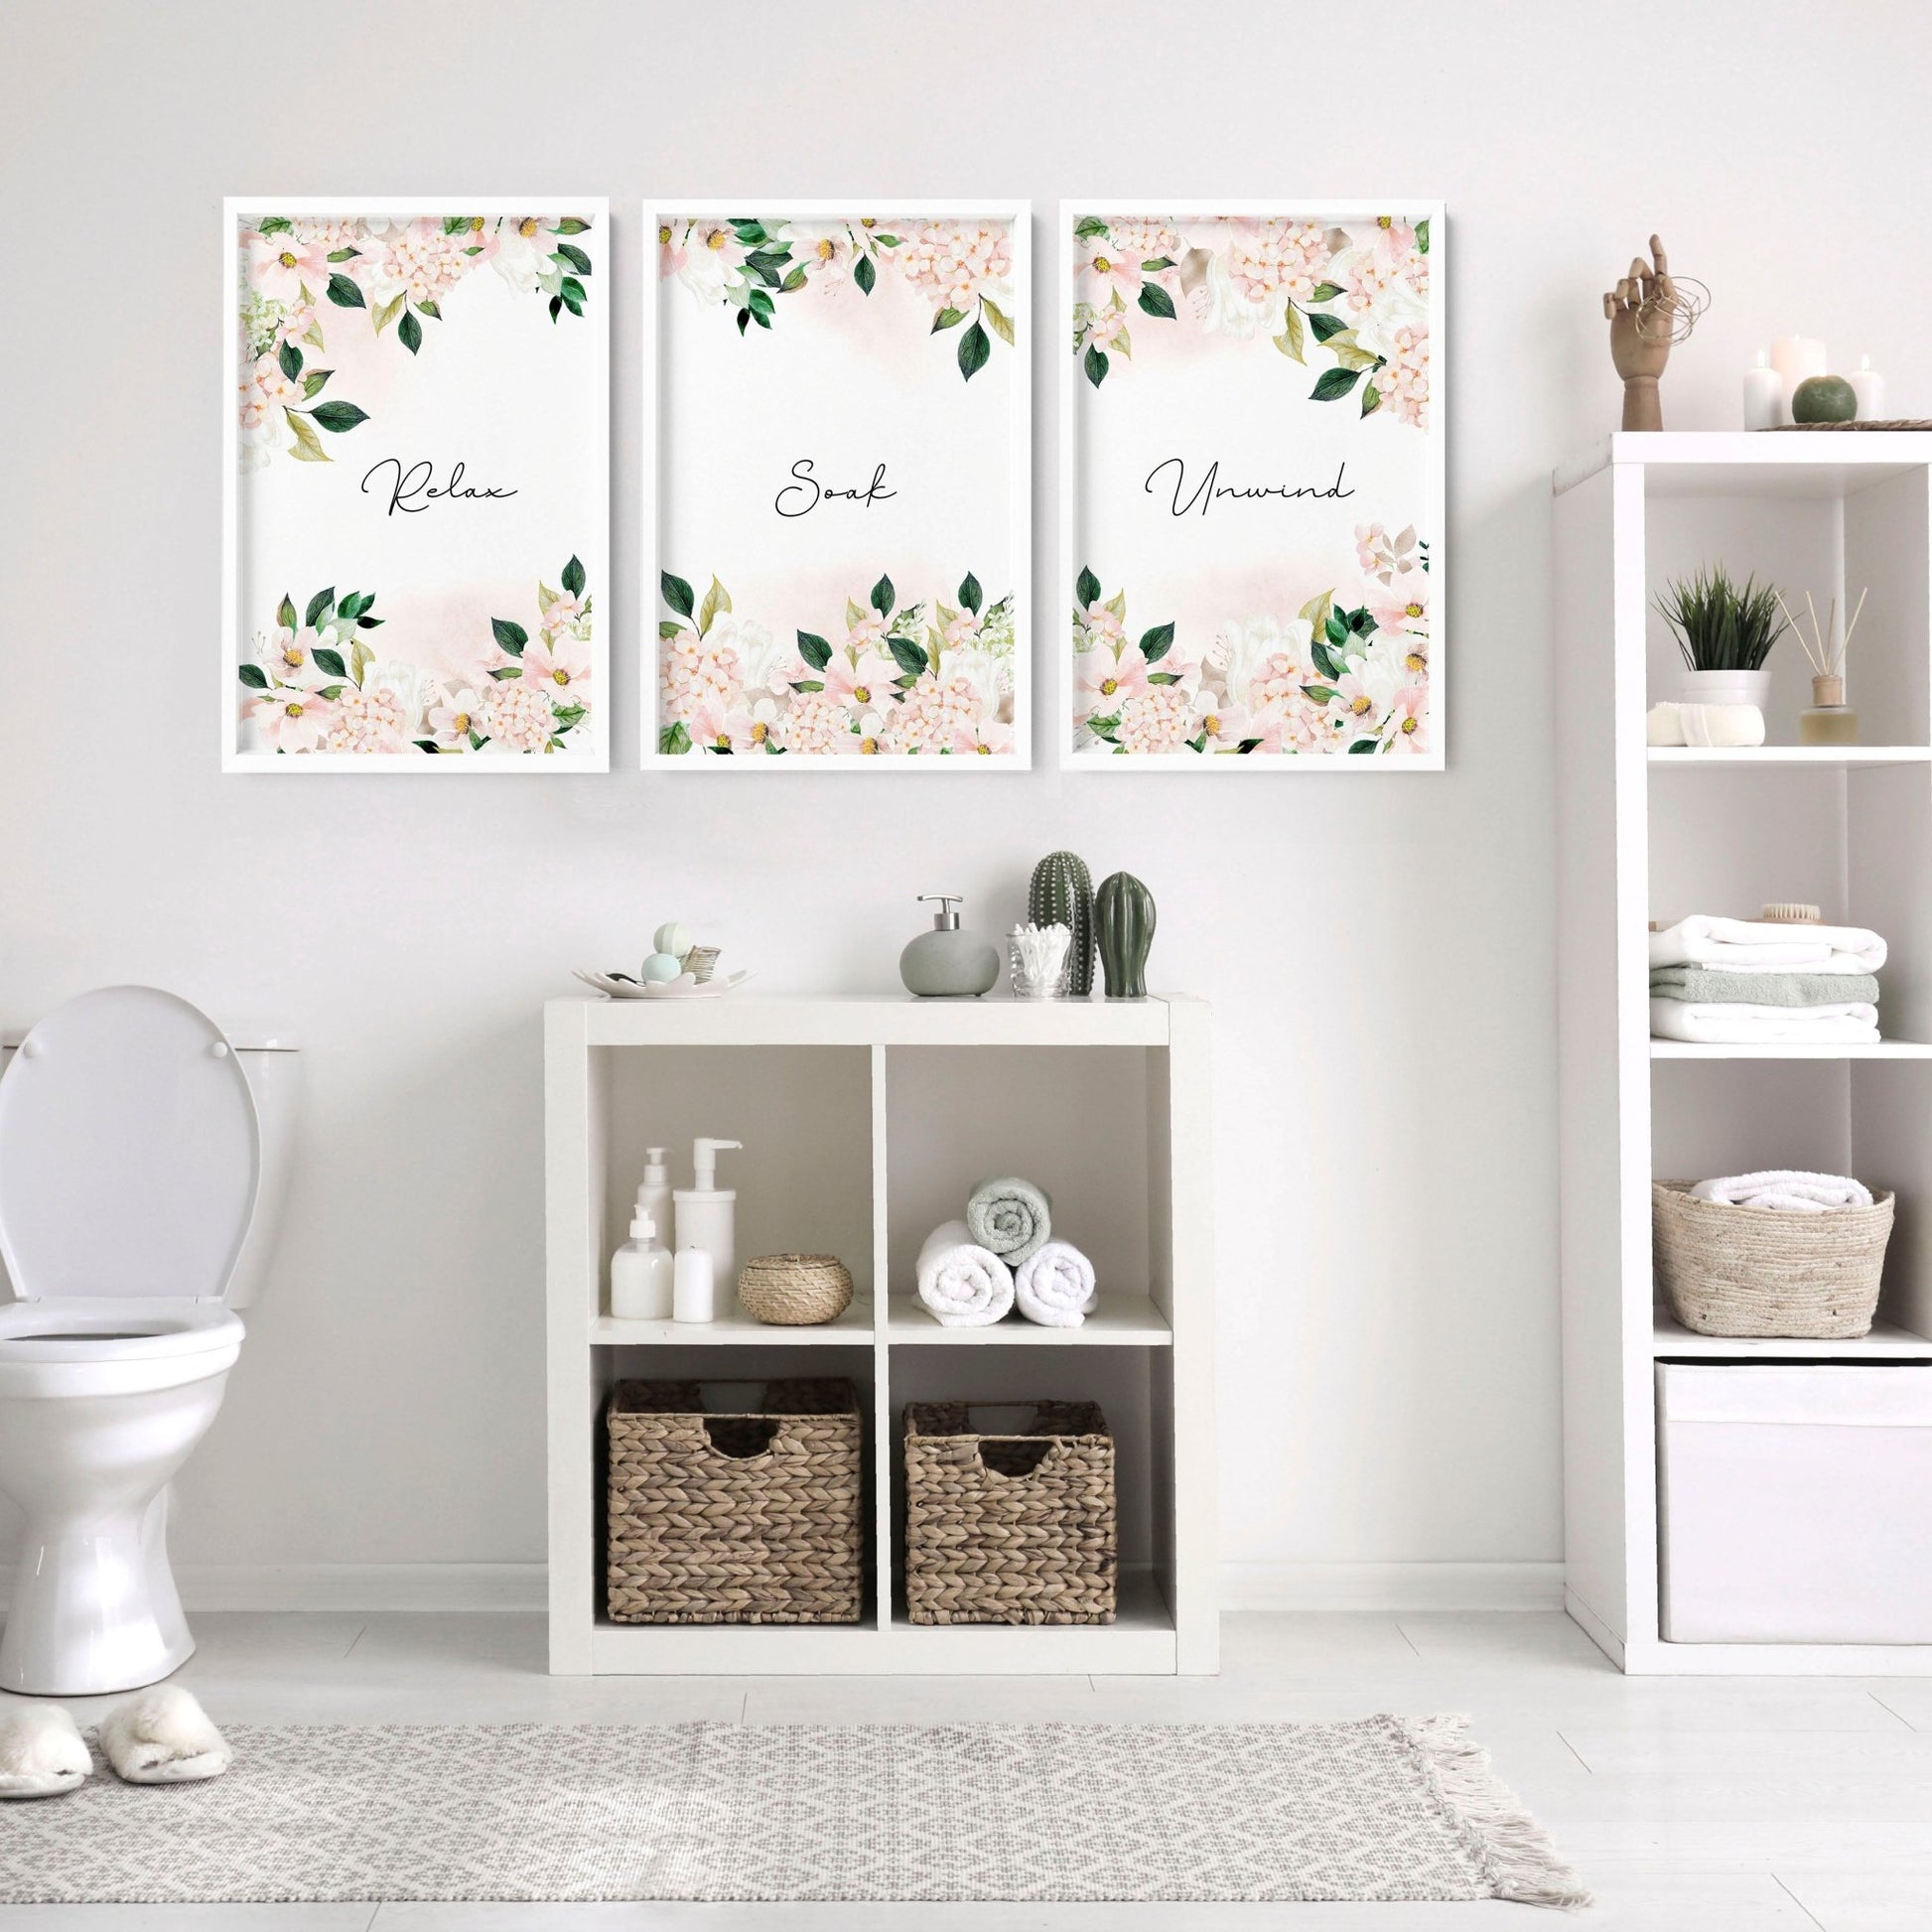 Shabby Chic Wall Hangings | set of 3 bathroom art prints - About Wall Art